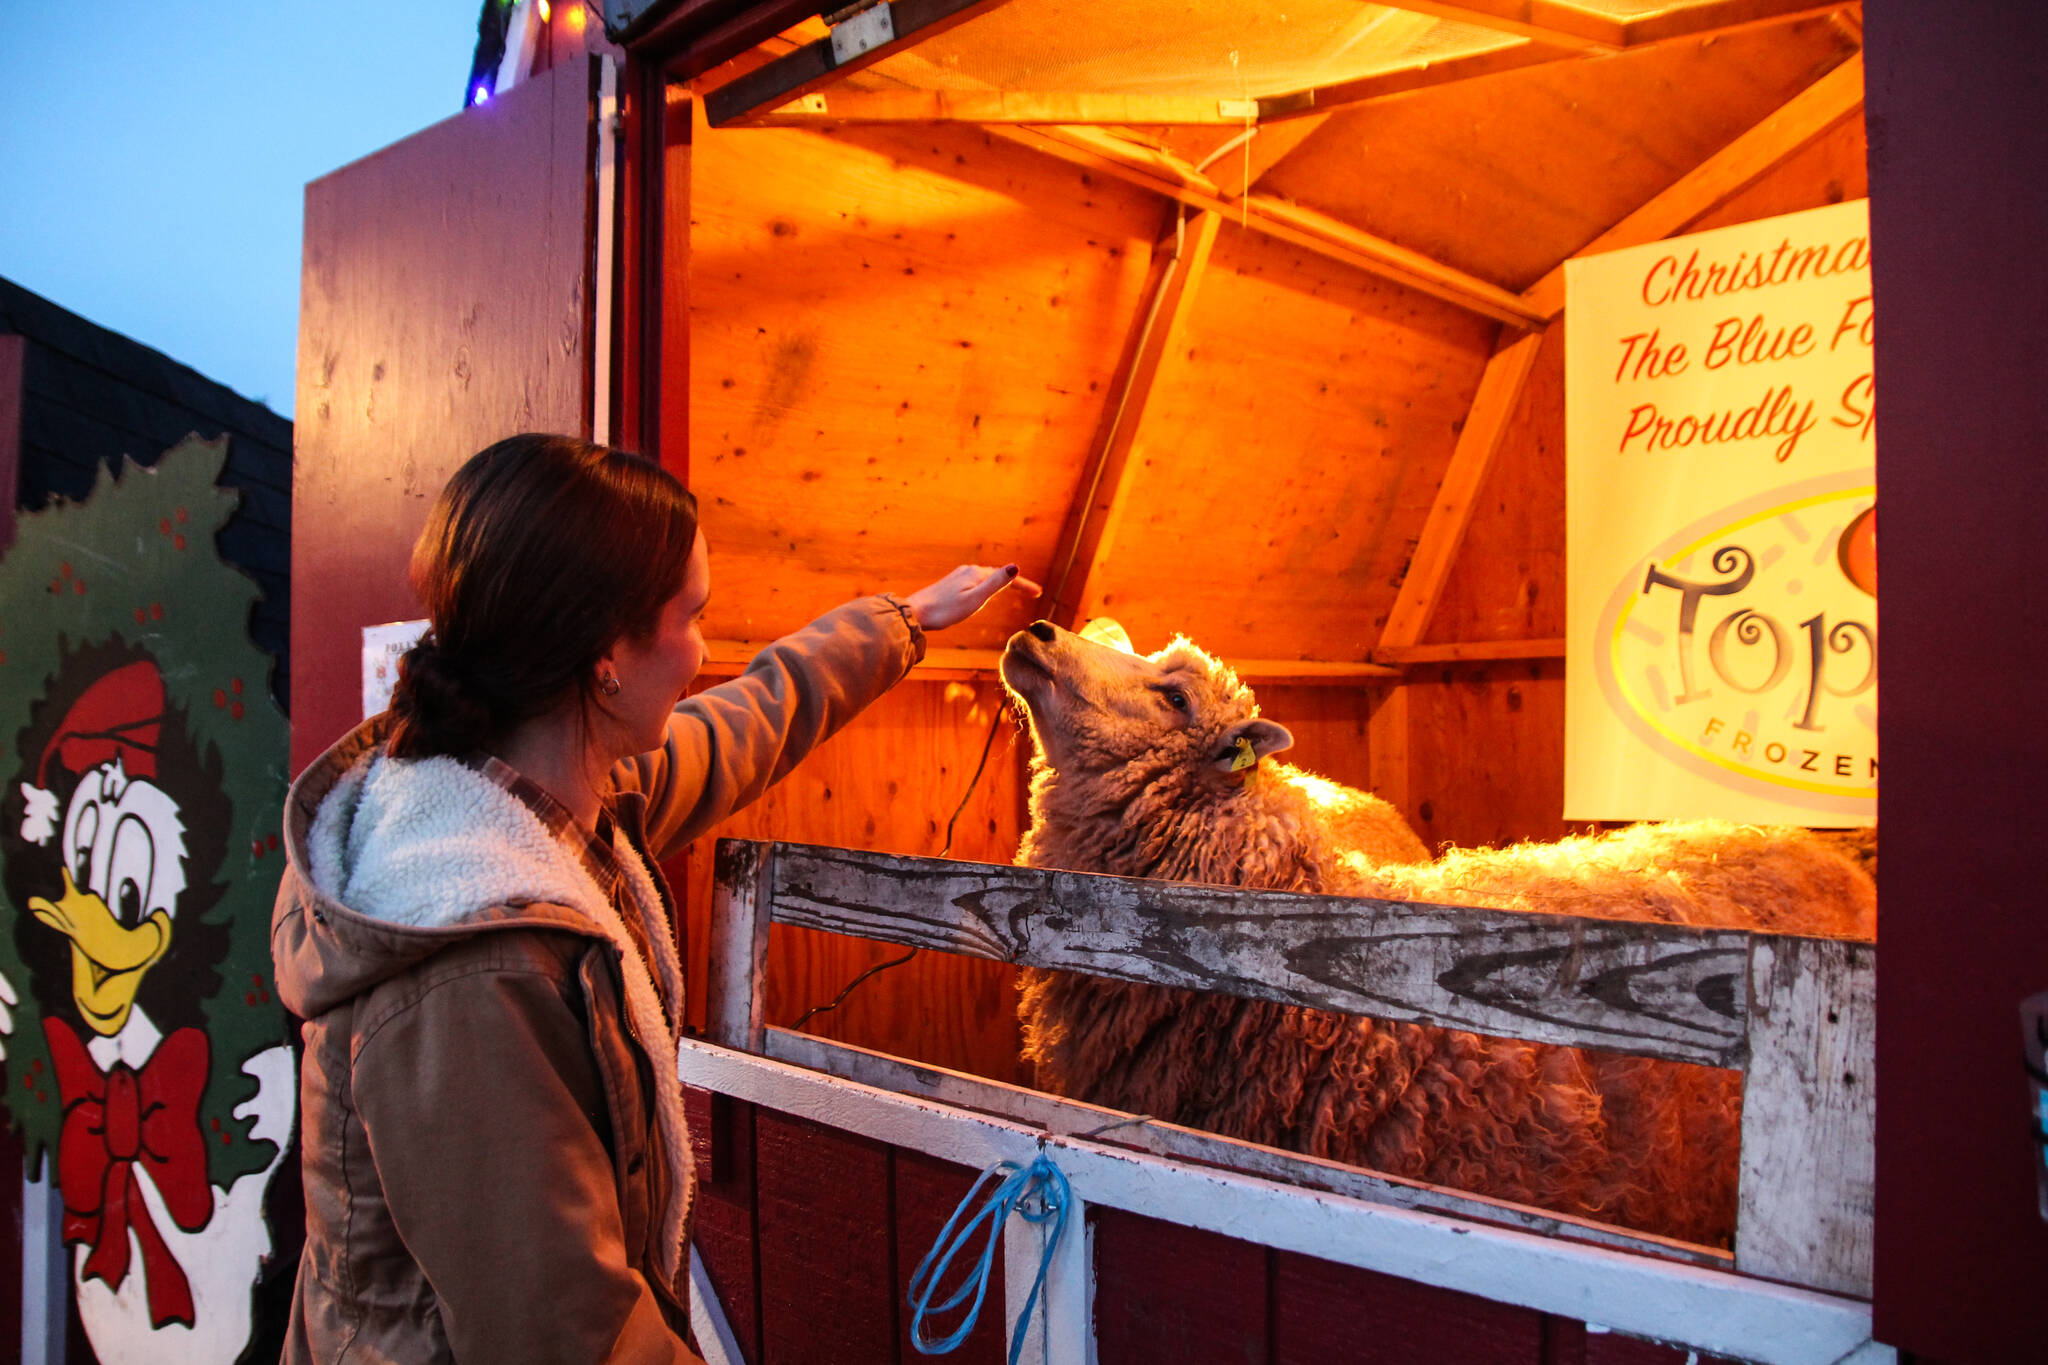 Brynn Brudge pets one of Bell’s Farm’s Golden Girls at the Christma Market. (Photo by Luisa Loi)